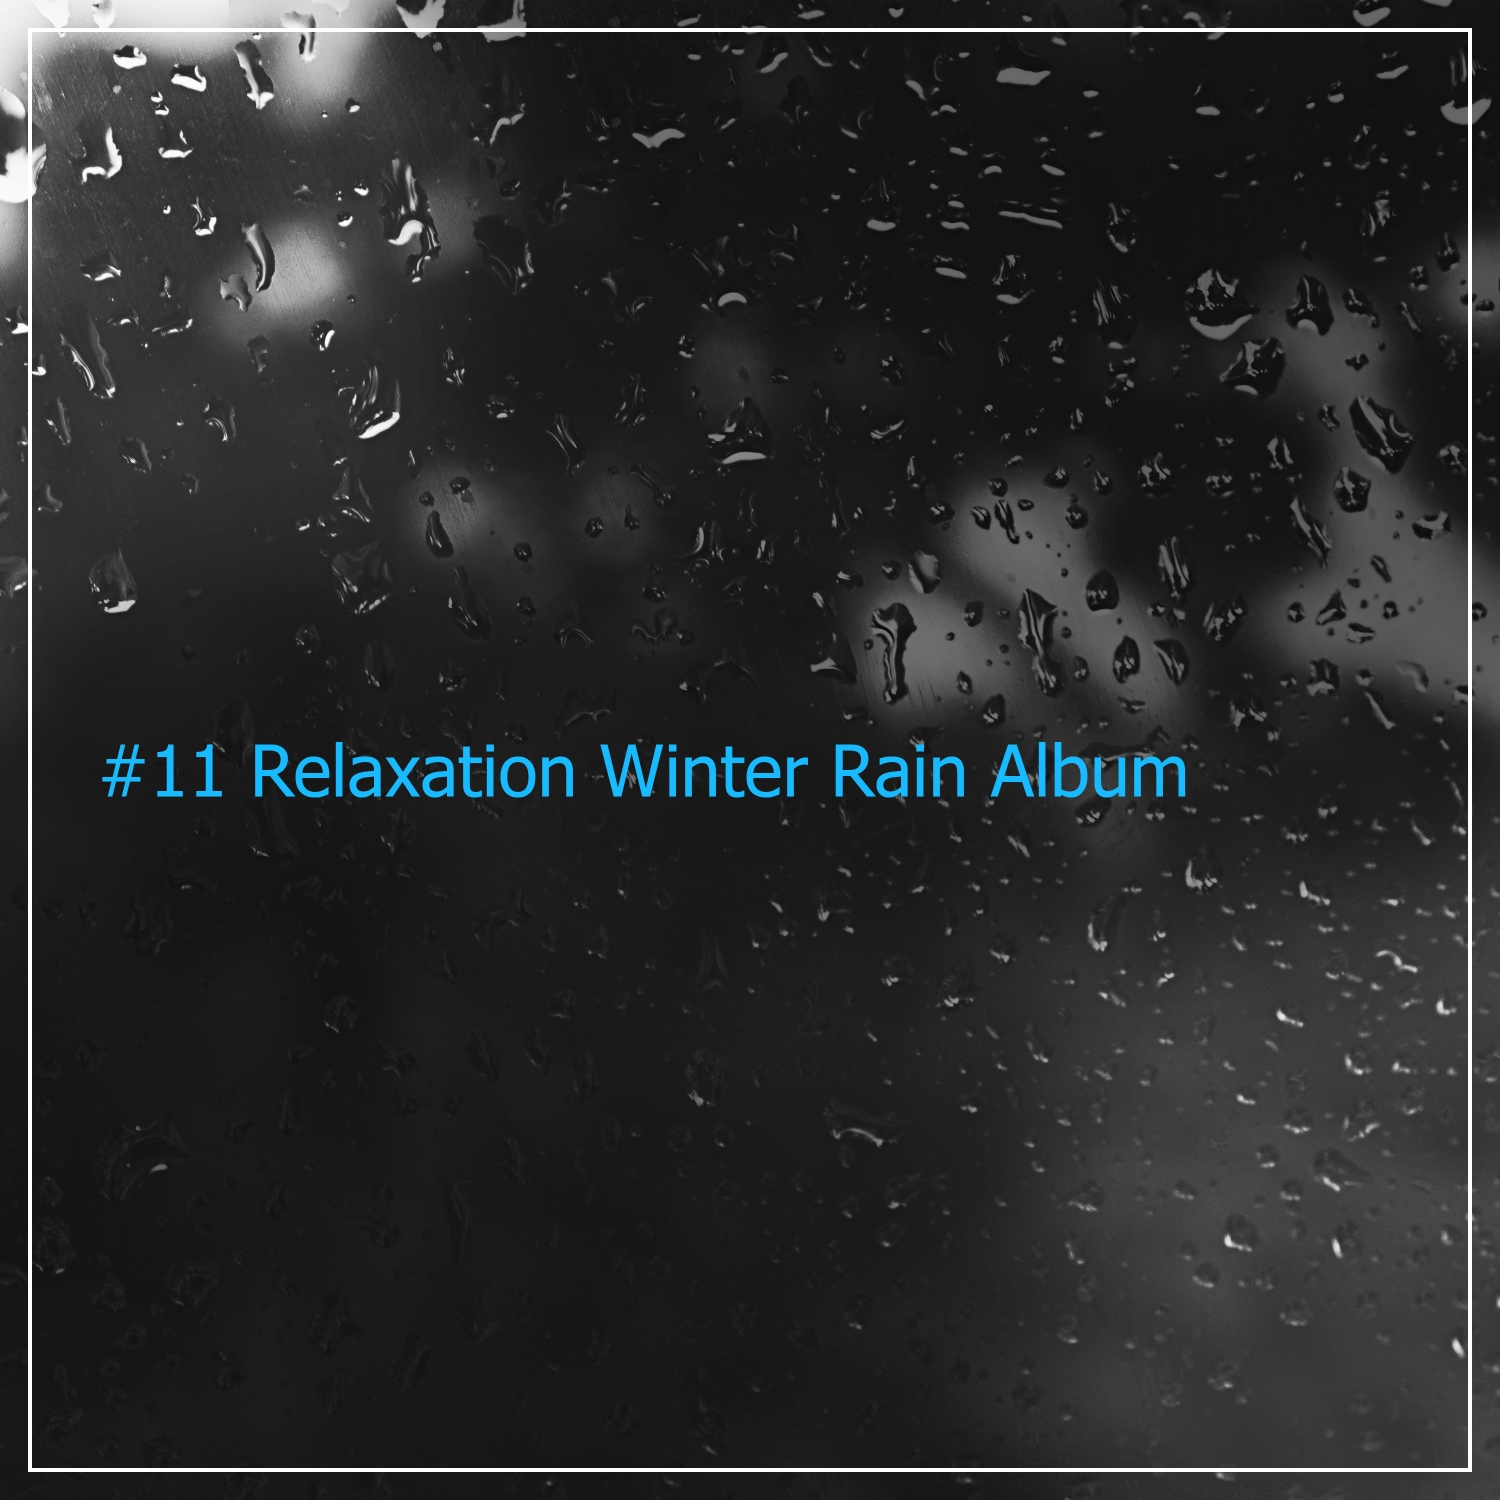 #11 Relaxation Winter Rain Album for Relaxation